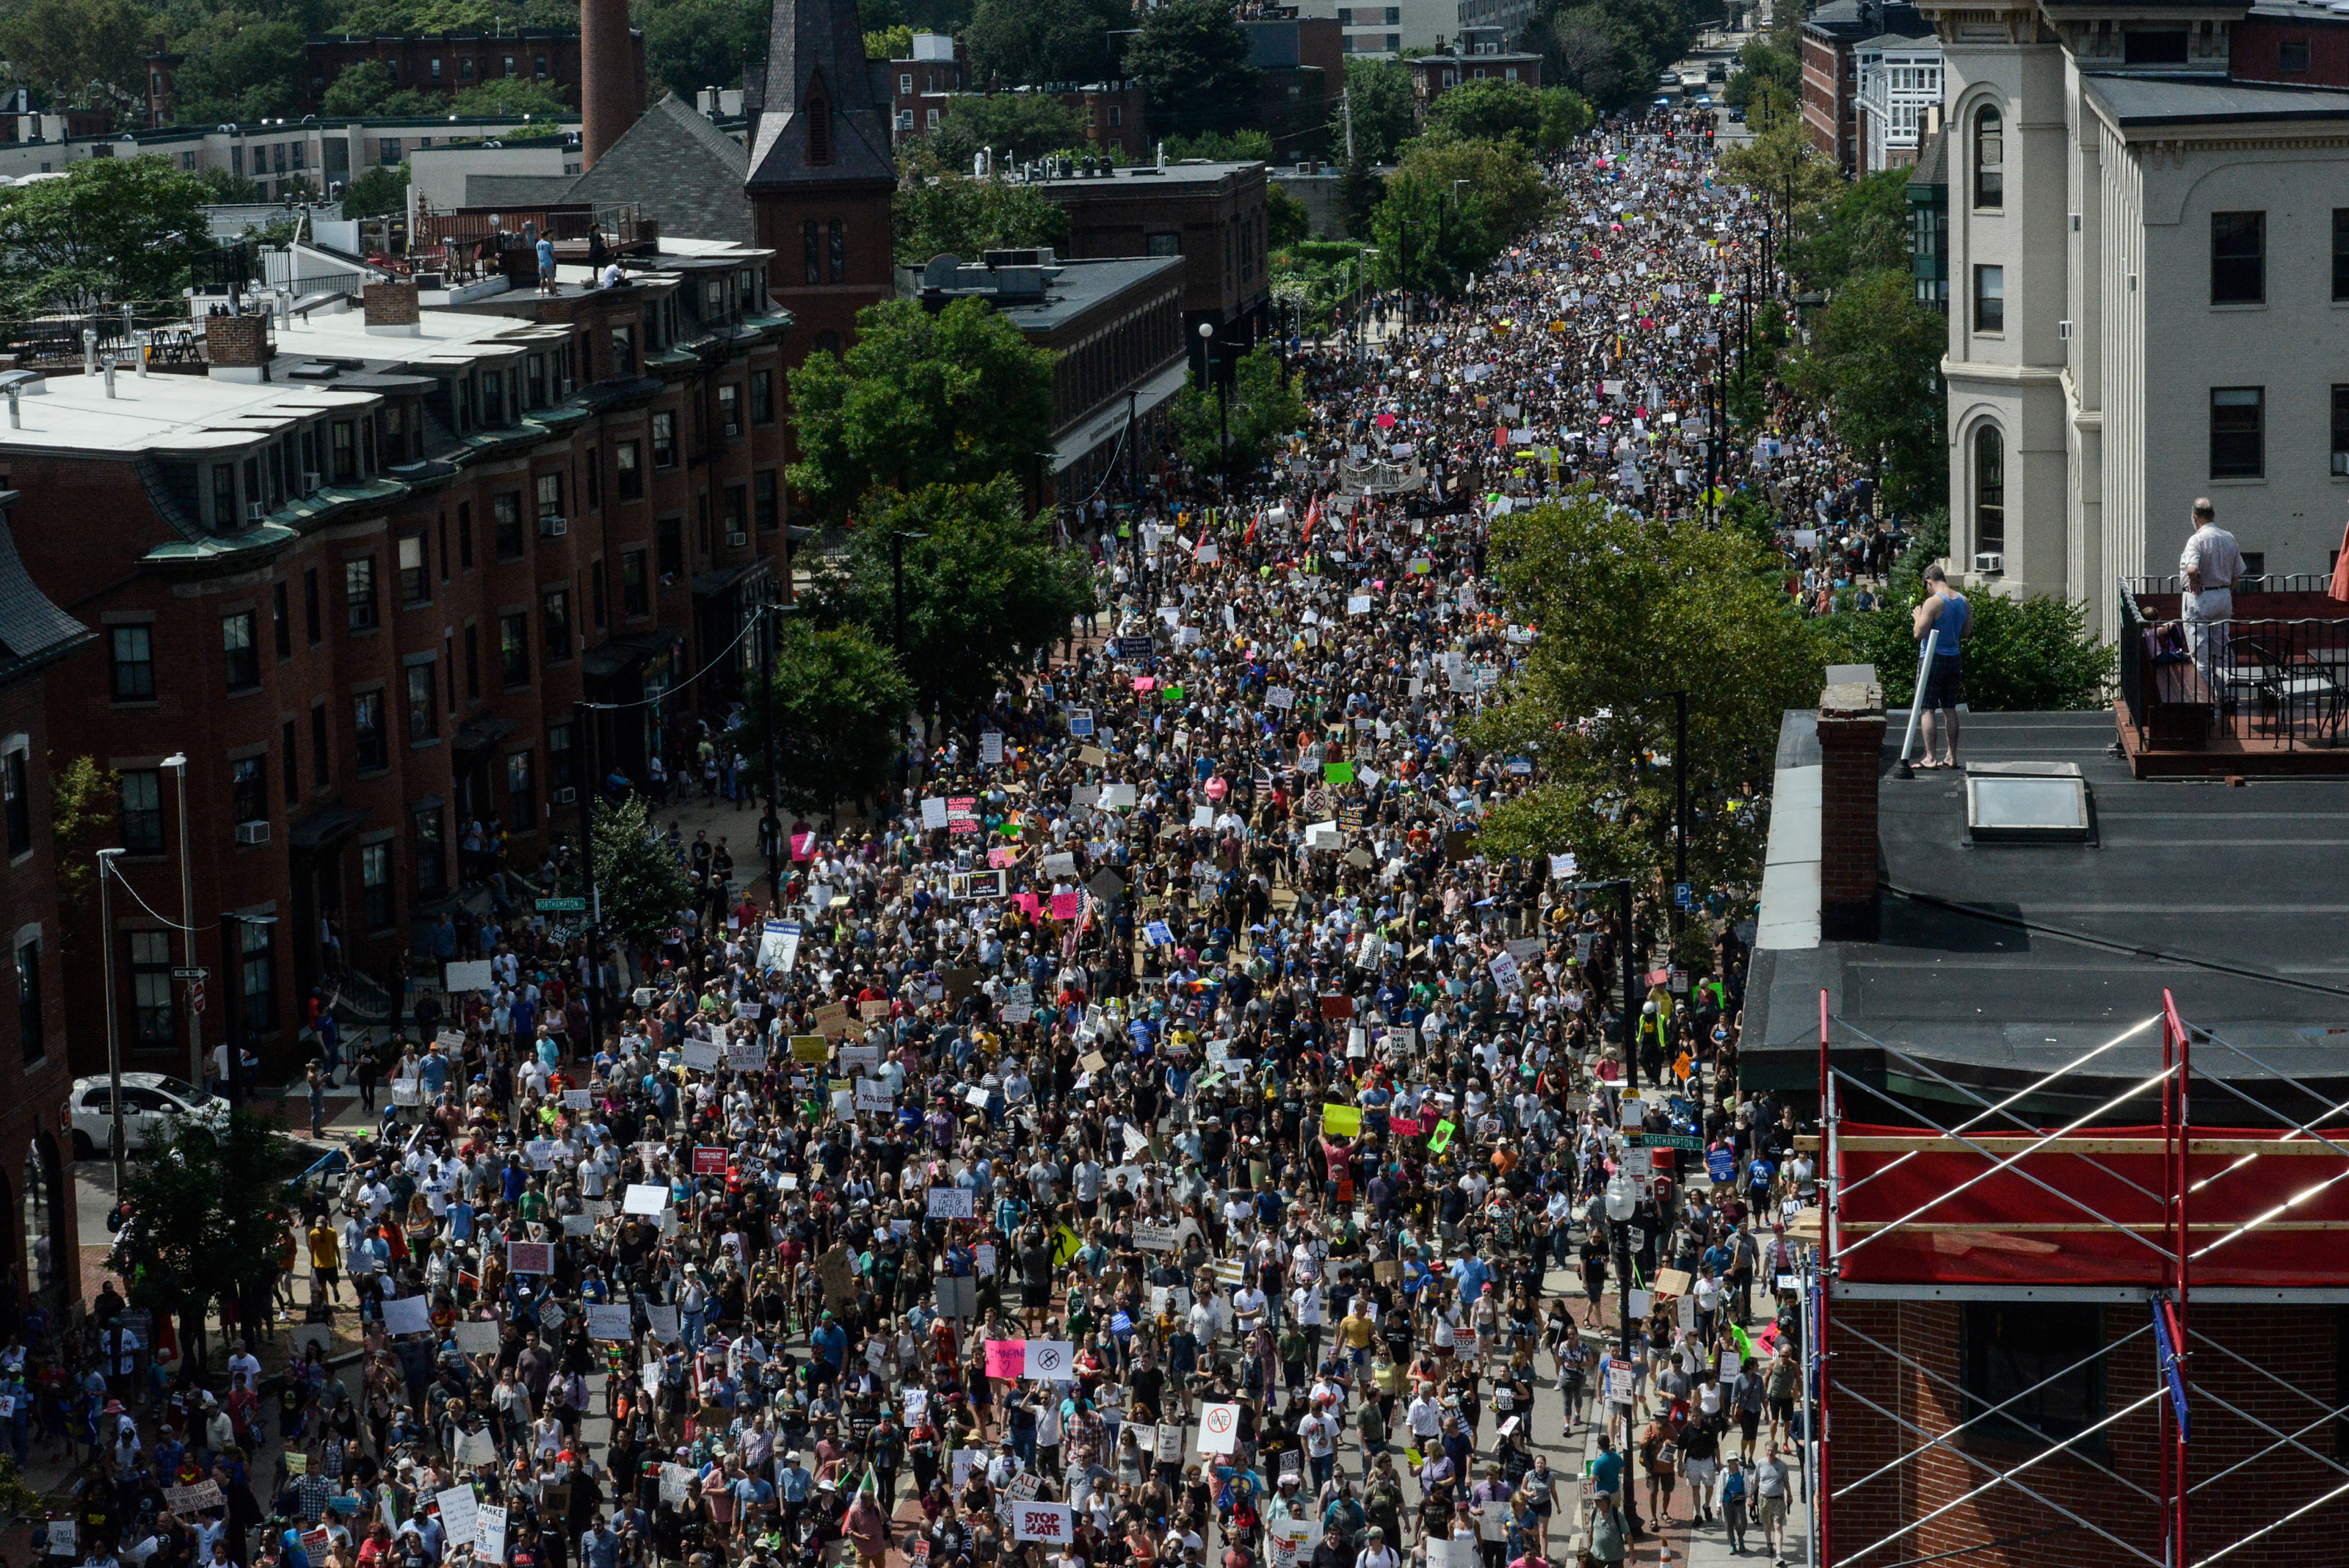 Thousands take to streets in Boston protest against hate speech